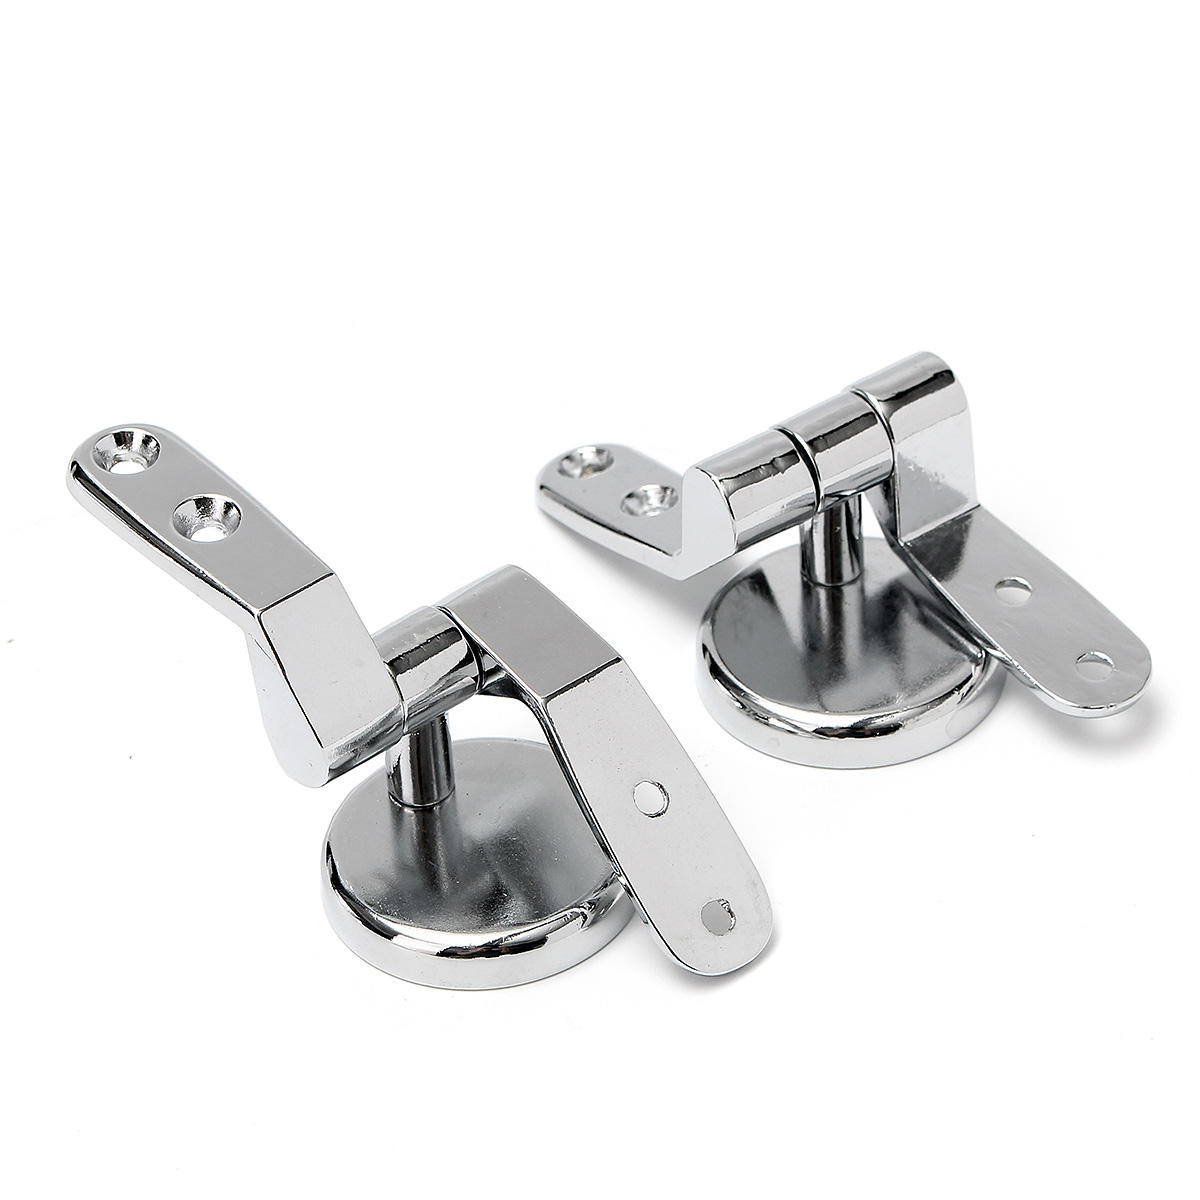 2Pcs Universal Replacement Toilet Seat Bar Hinge Set Chrome Hinges with Fittings